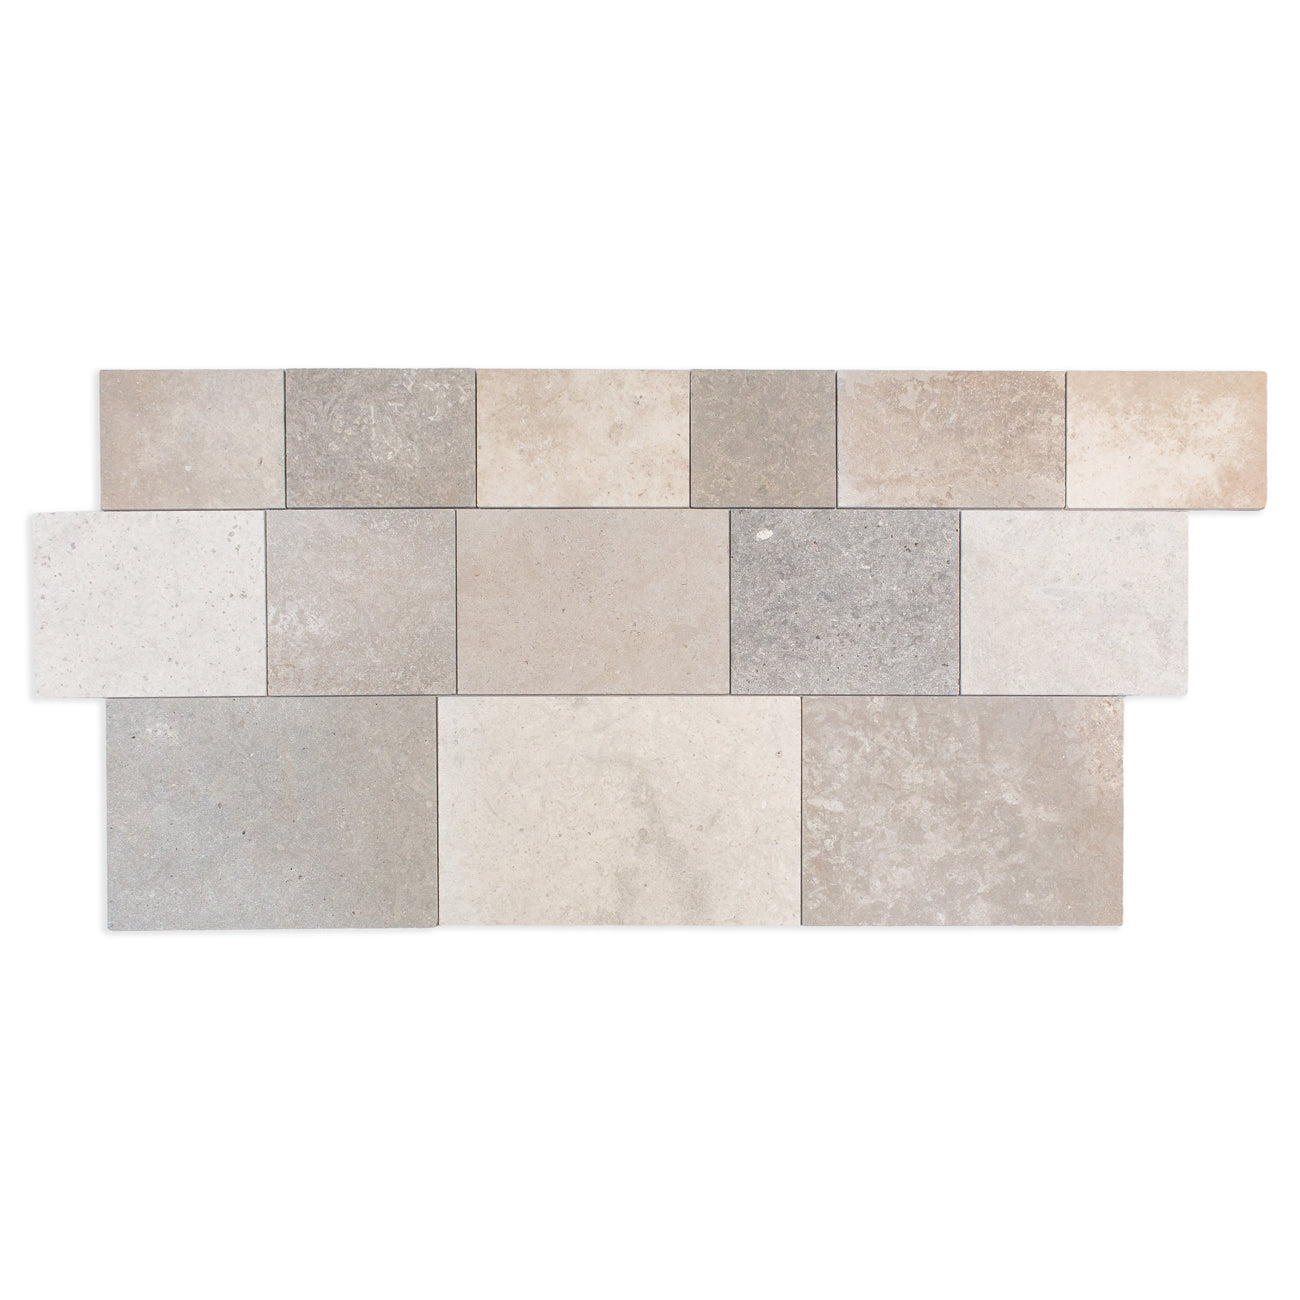 haussmann bordeaux gris marly natural limestone old bourgogne interior pattern patine chiseled edge 5_8 inch thick